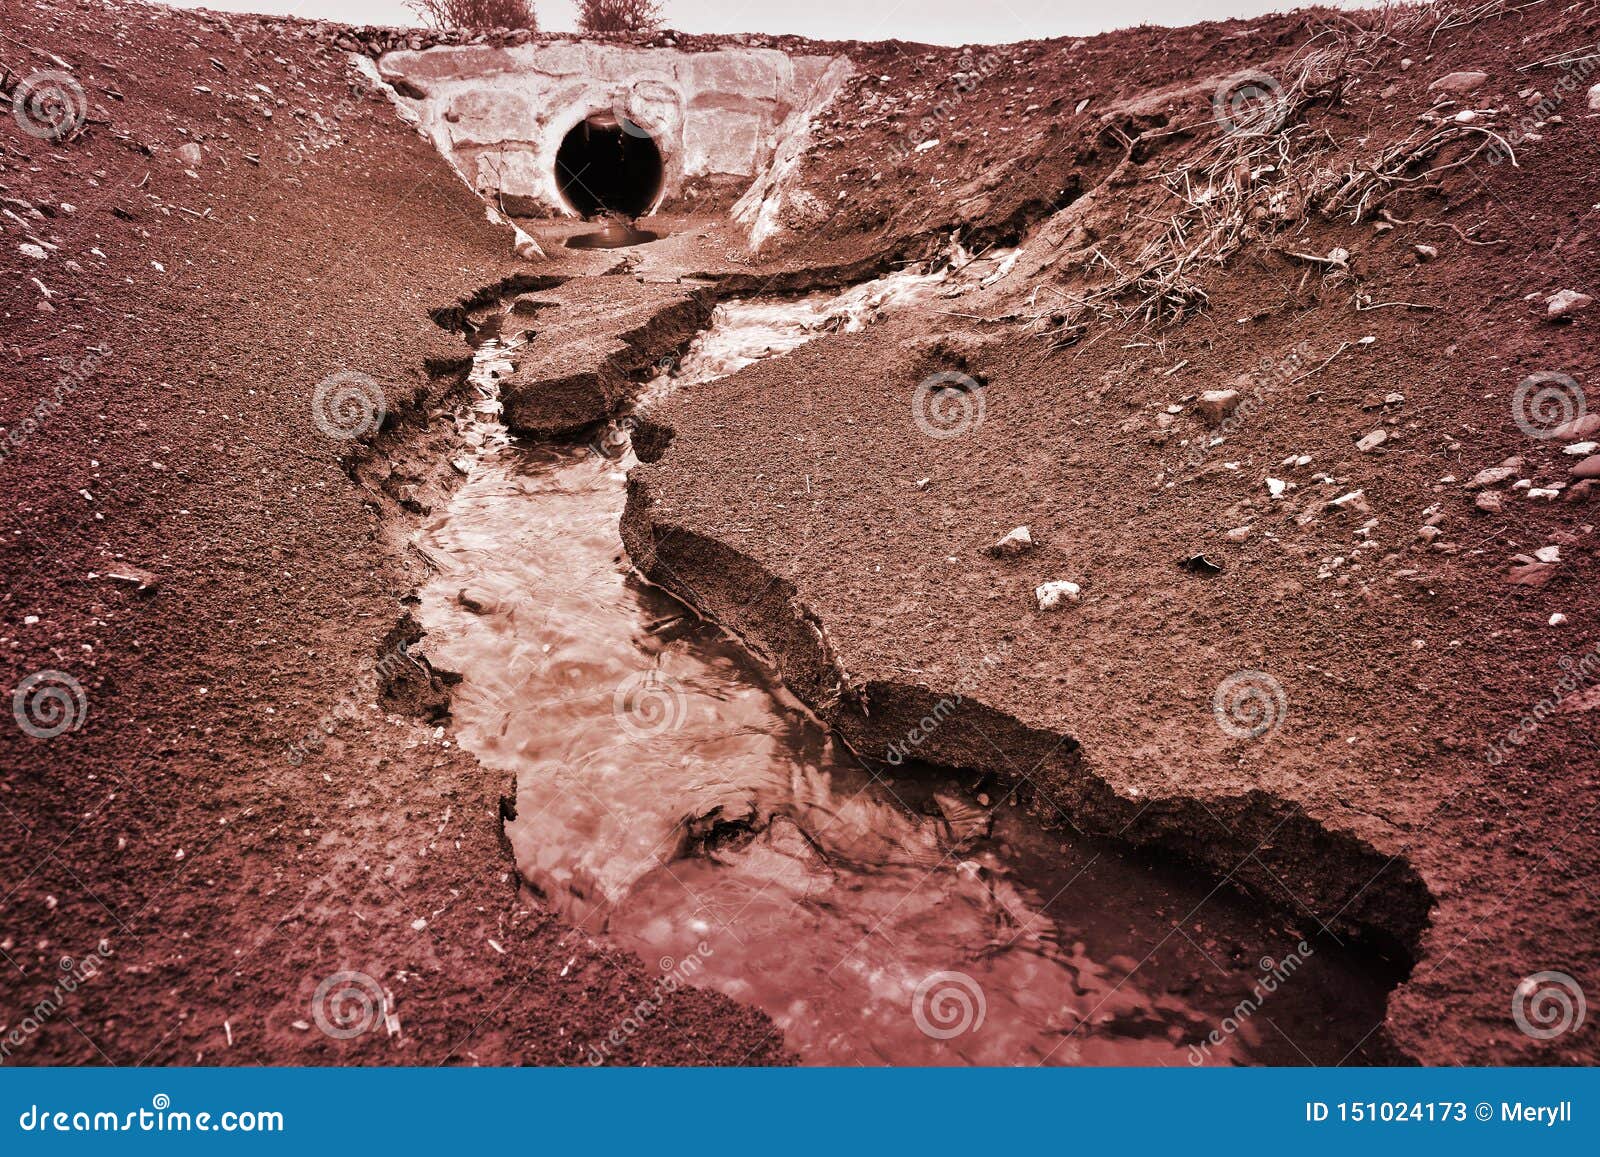 water erosion by water flow in a chanel or ditch